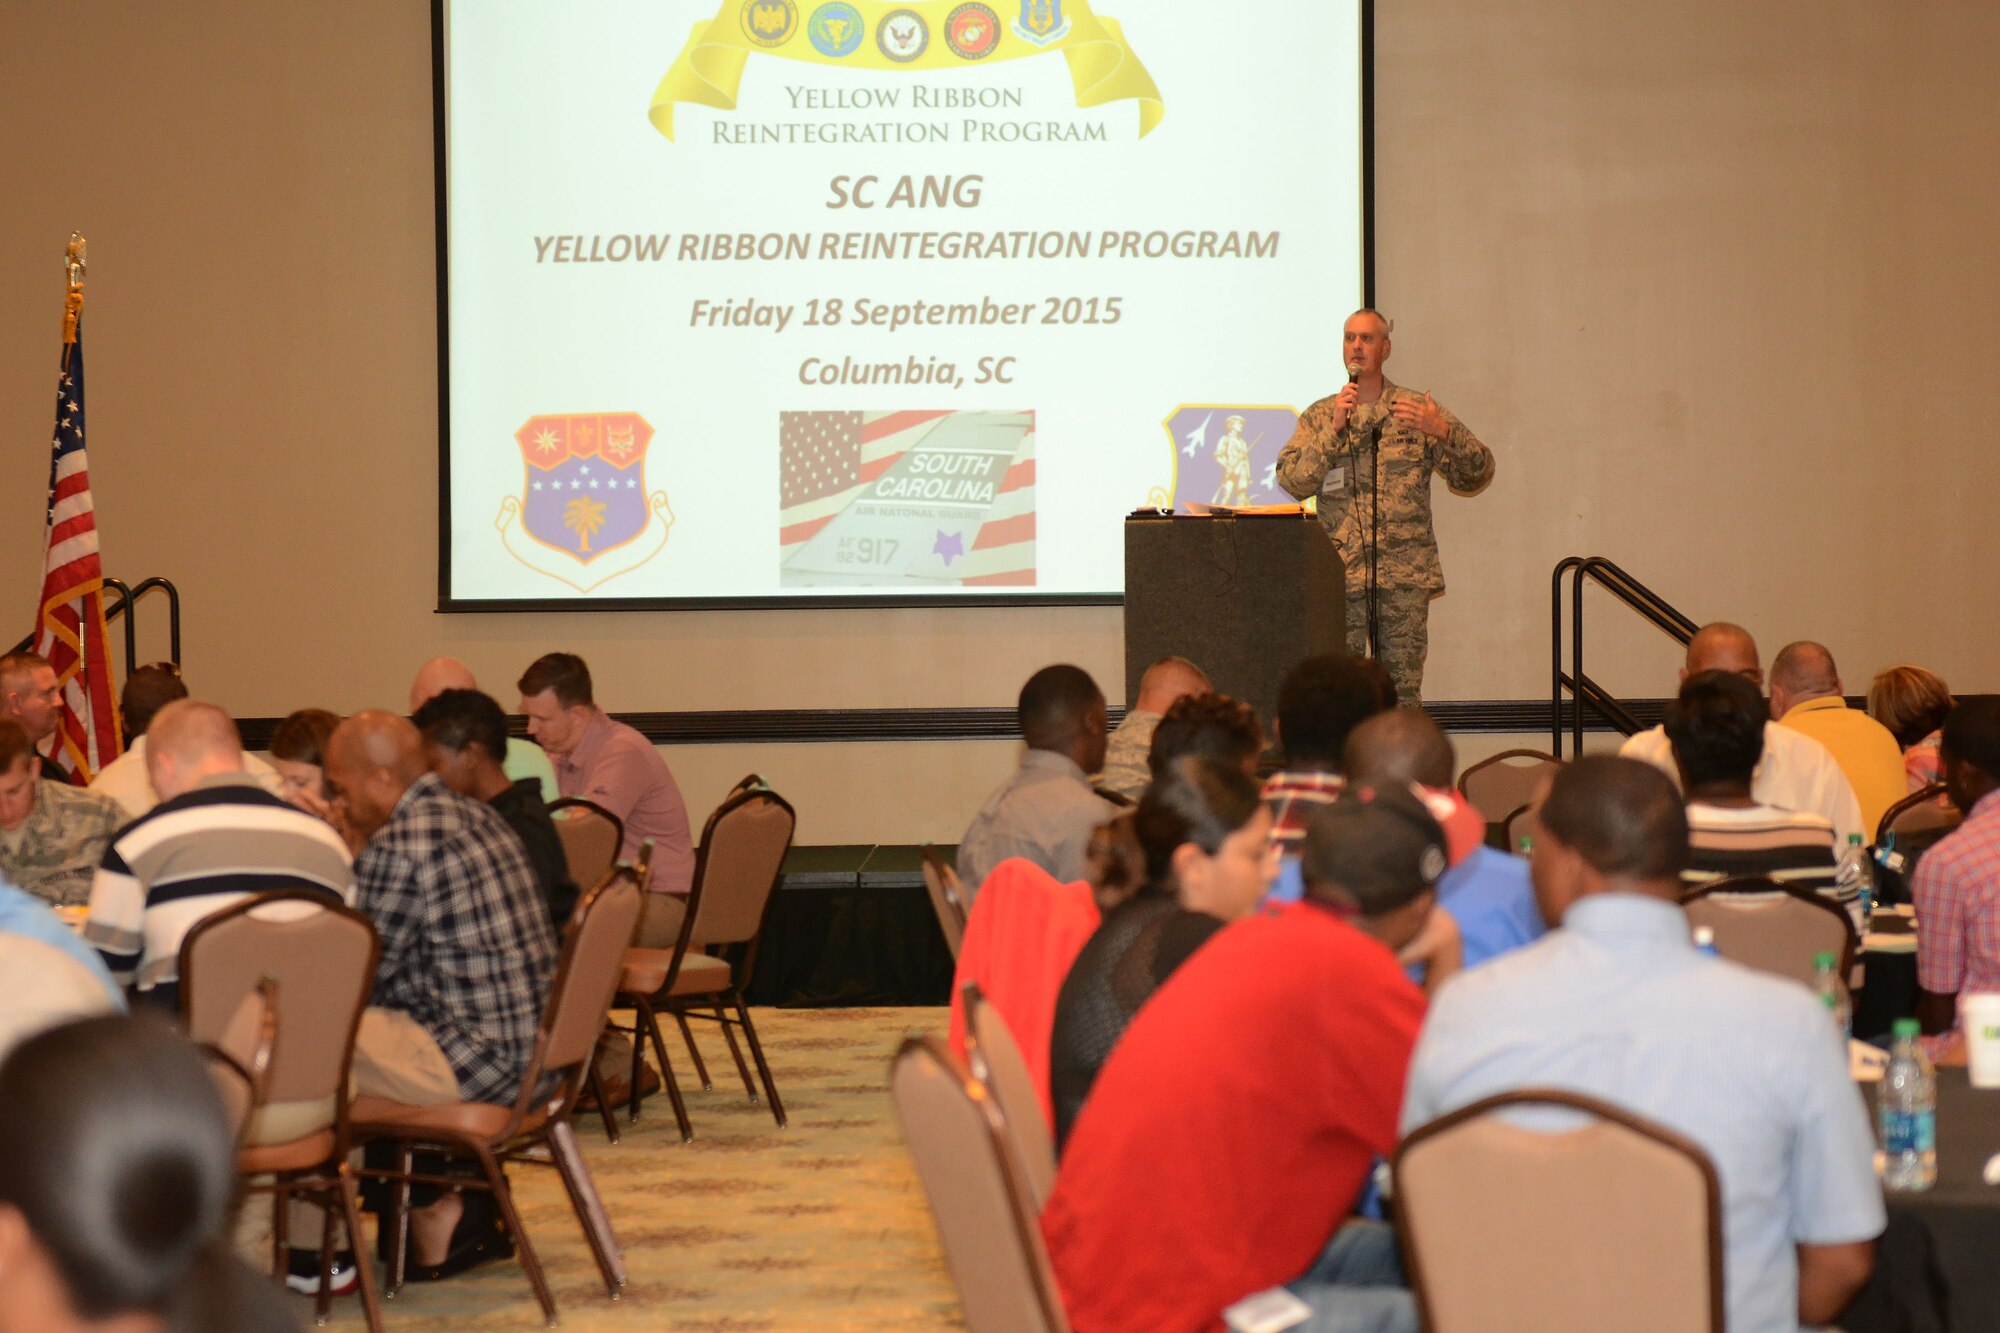 U.S. Air Force Lt. Col. Brian Bohlman, 169th Fighter Wing chaplain at McEntire Joint National Guard Base, S.C., speaks to South Carolina Air National Guardsmen at the Medallion Center in Columbia, S.C., during the Yellow Ribbon Reintegration Program seminar, Sept. 18, 2015.  The Y.R.R.P. provides resources for SCANG members and their families during deployment cycles.  (U.S. Air National Guard photo by Airman 1st Class Ashleigh Pavelek/RELEASED)